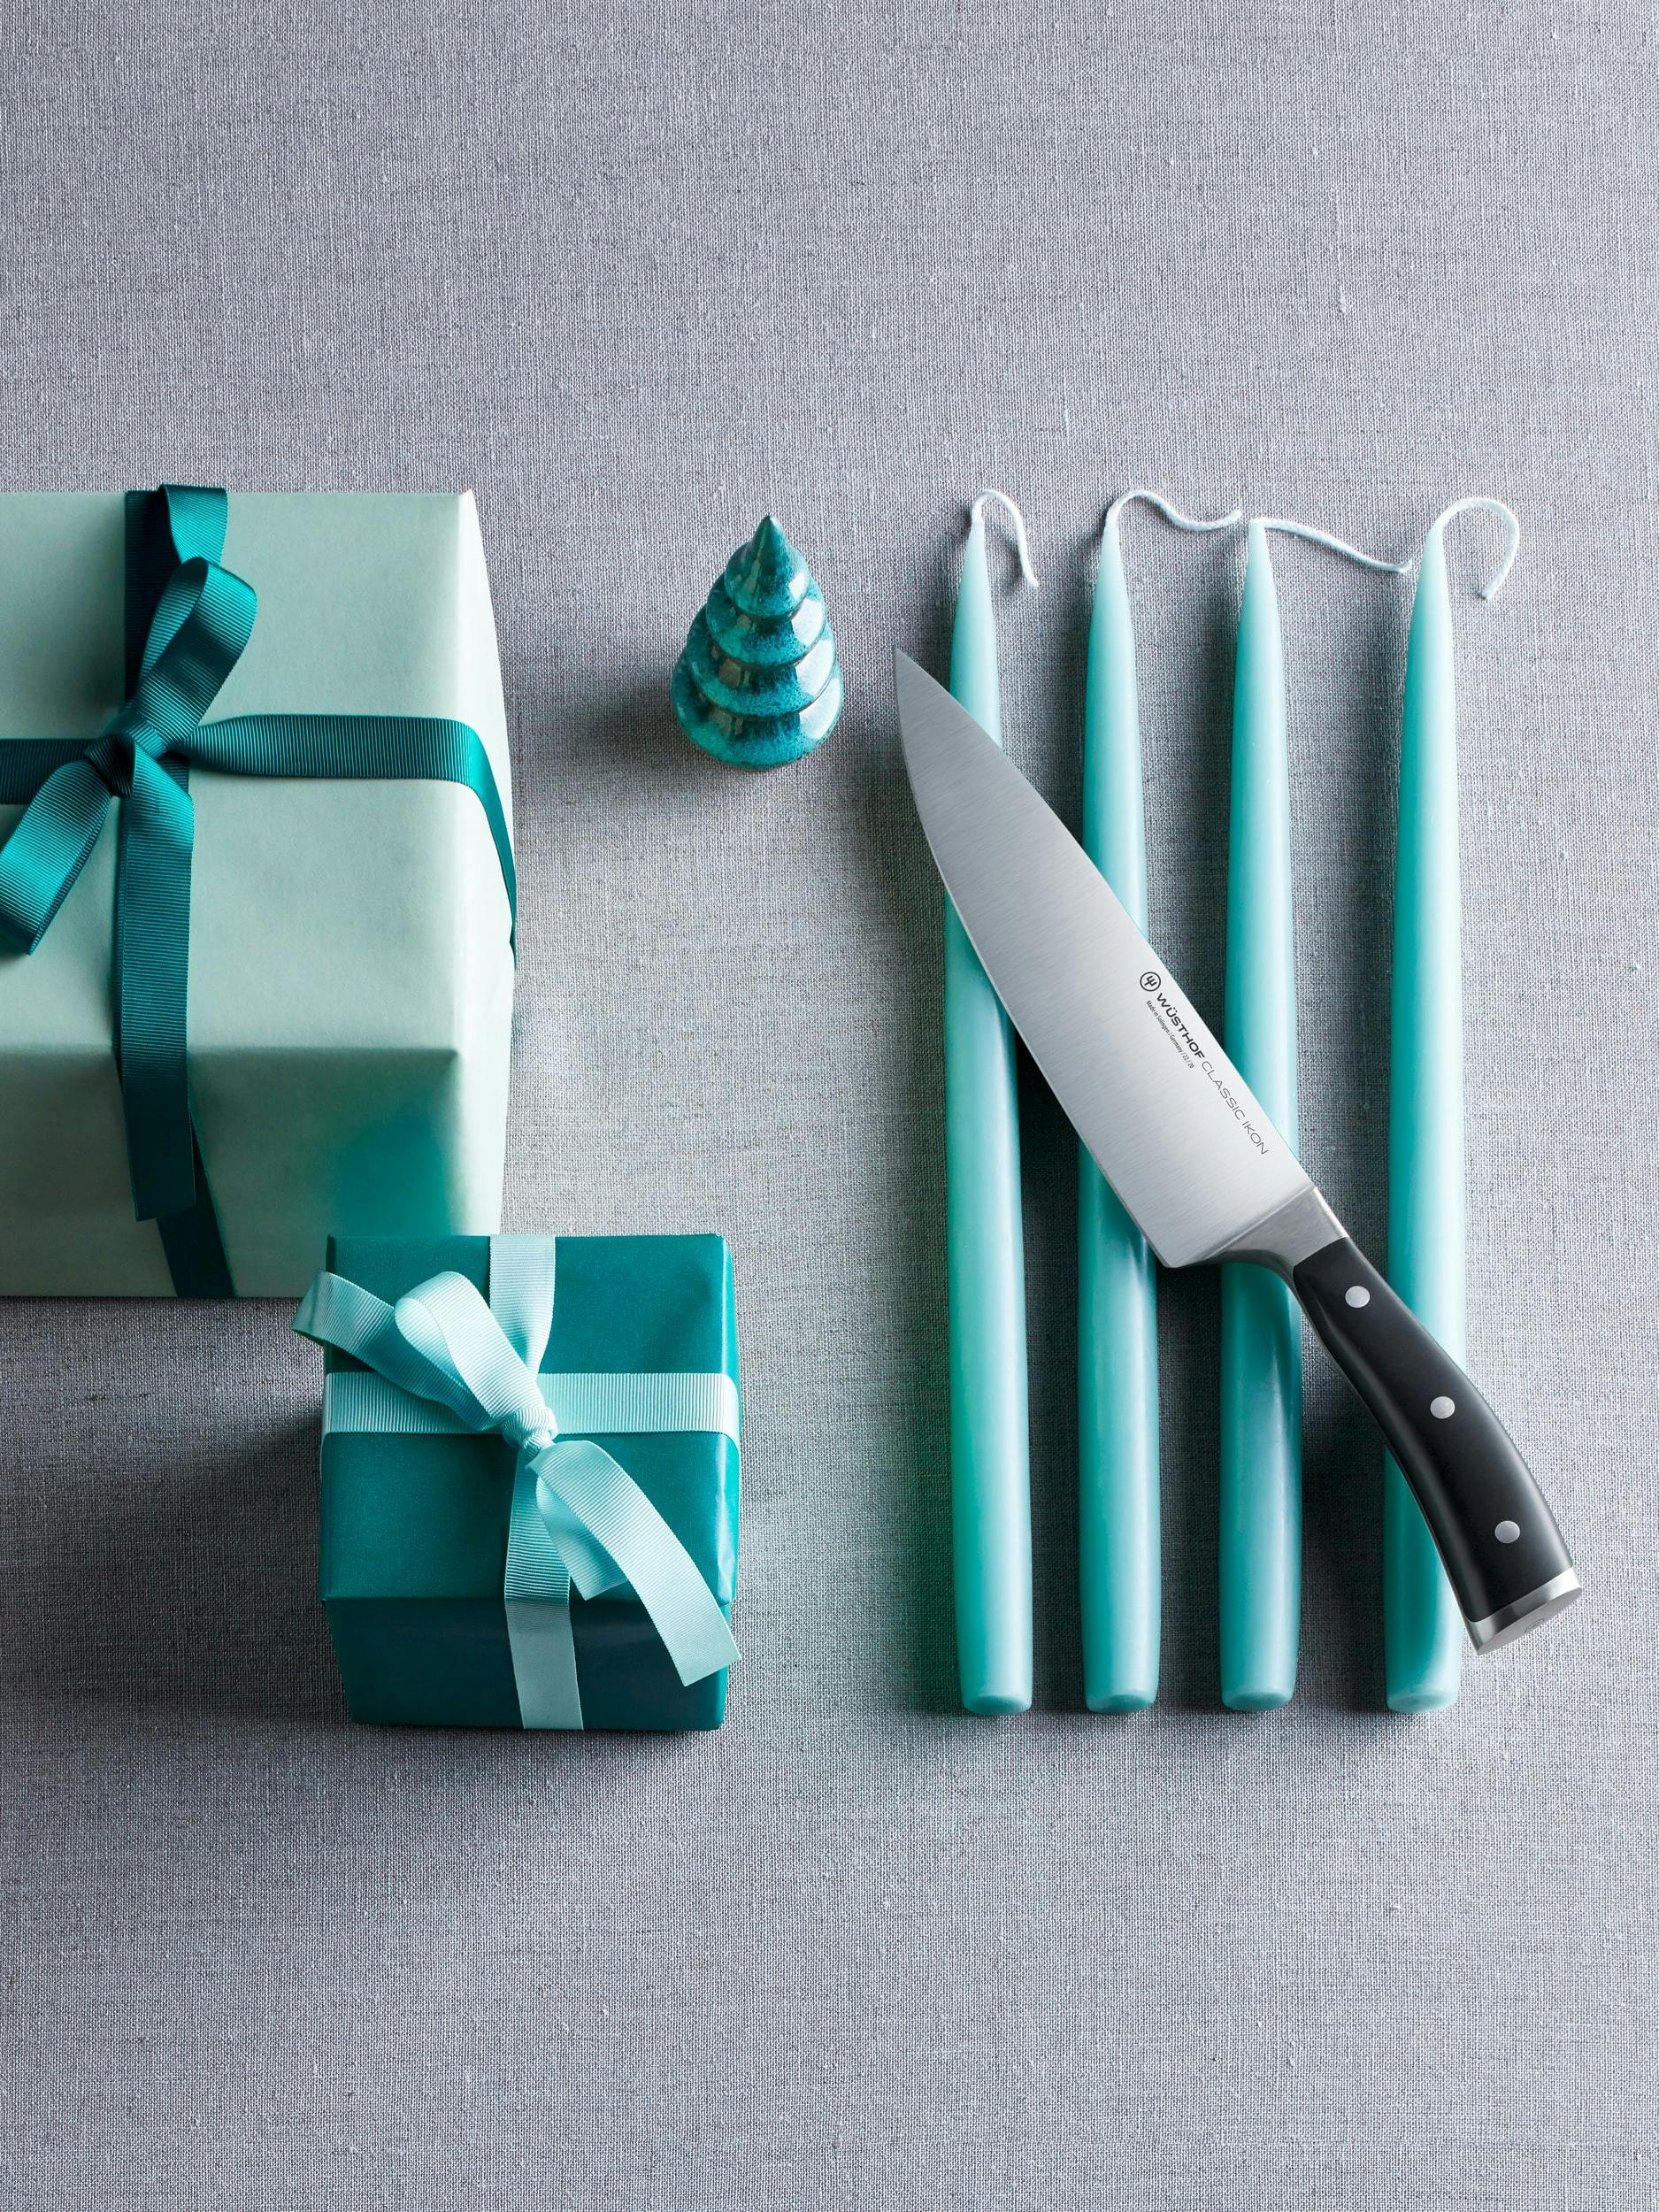 Classic Ikon knife styled next to blue candles and presents